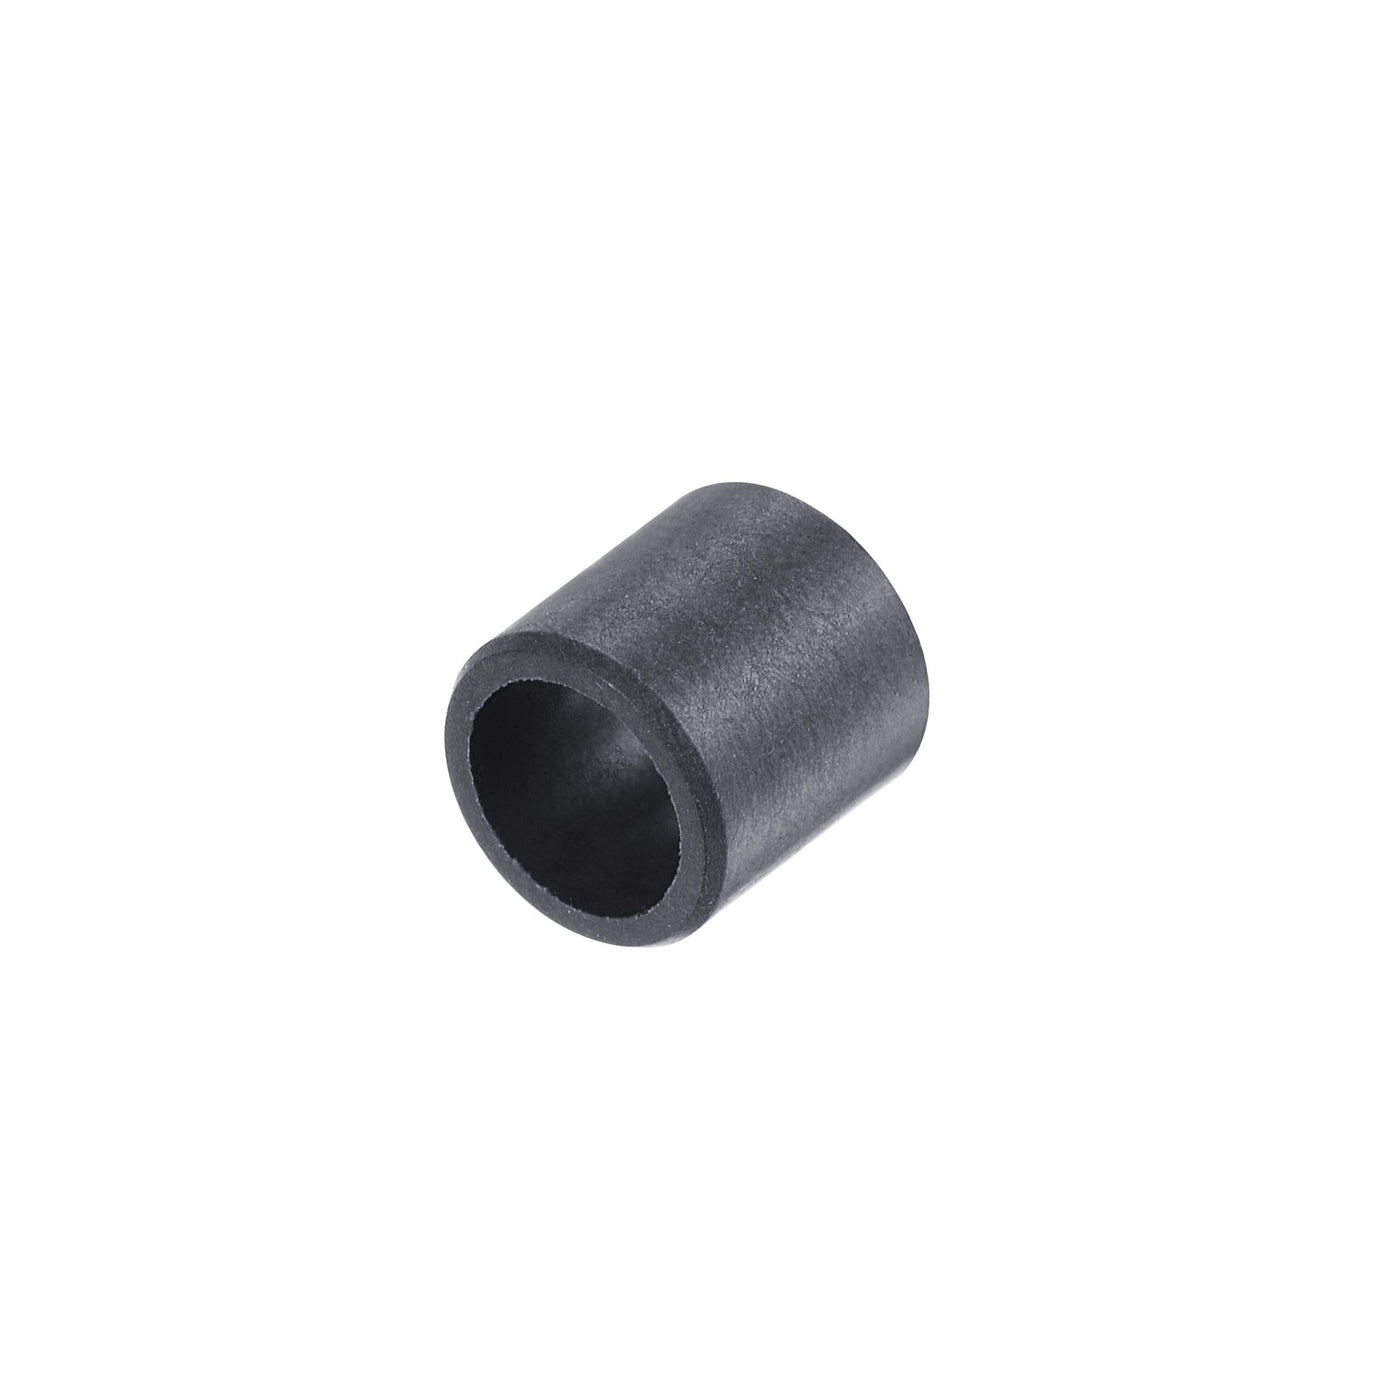 uxcell Uxcell Sleeve Bearings 6mmx8mmx8mm POM Wrapped Oilless Bushings Black